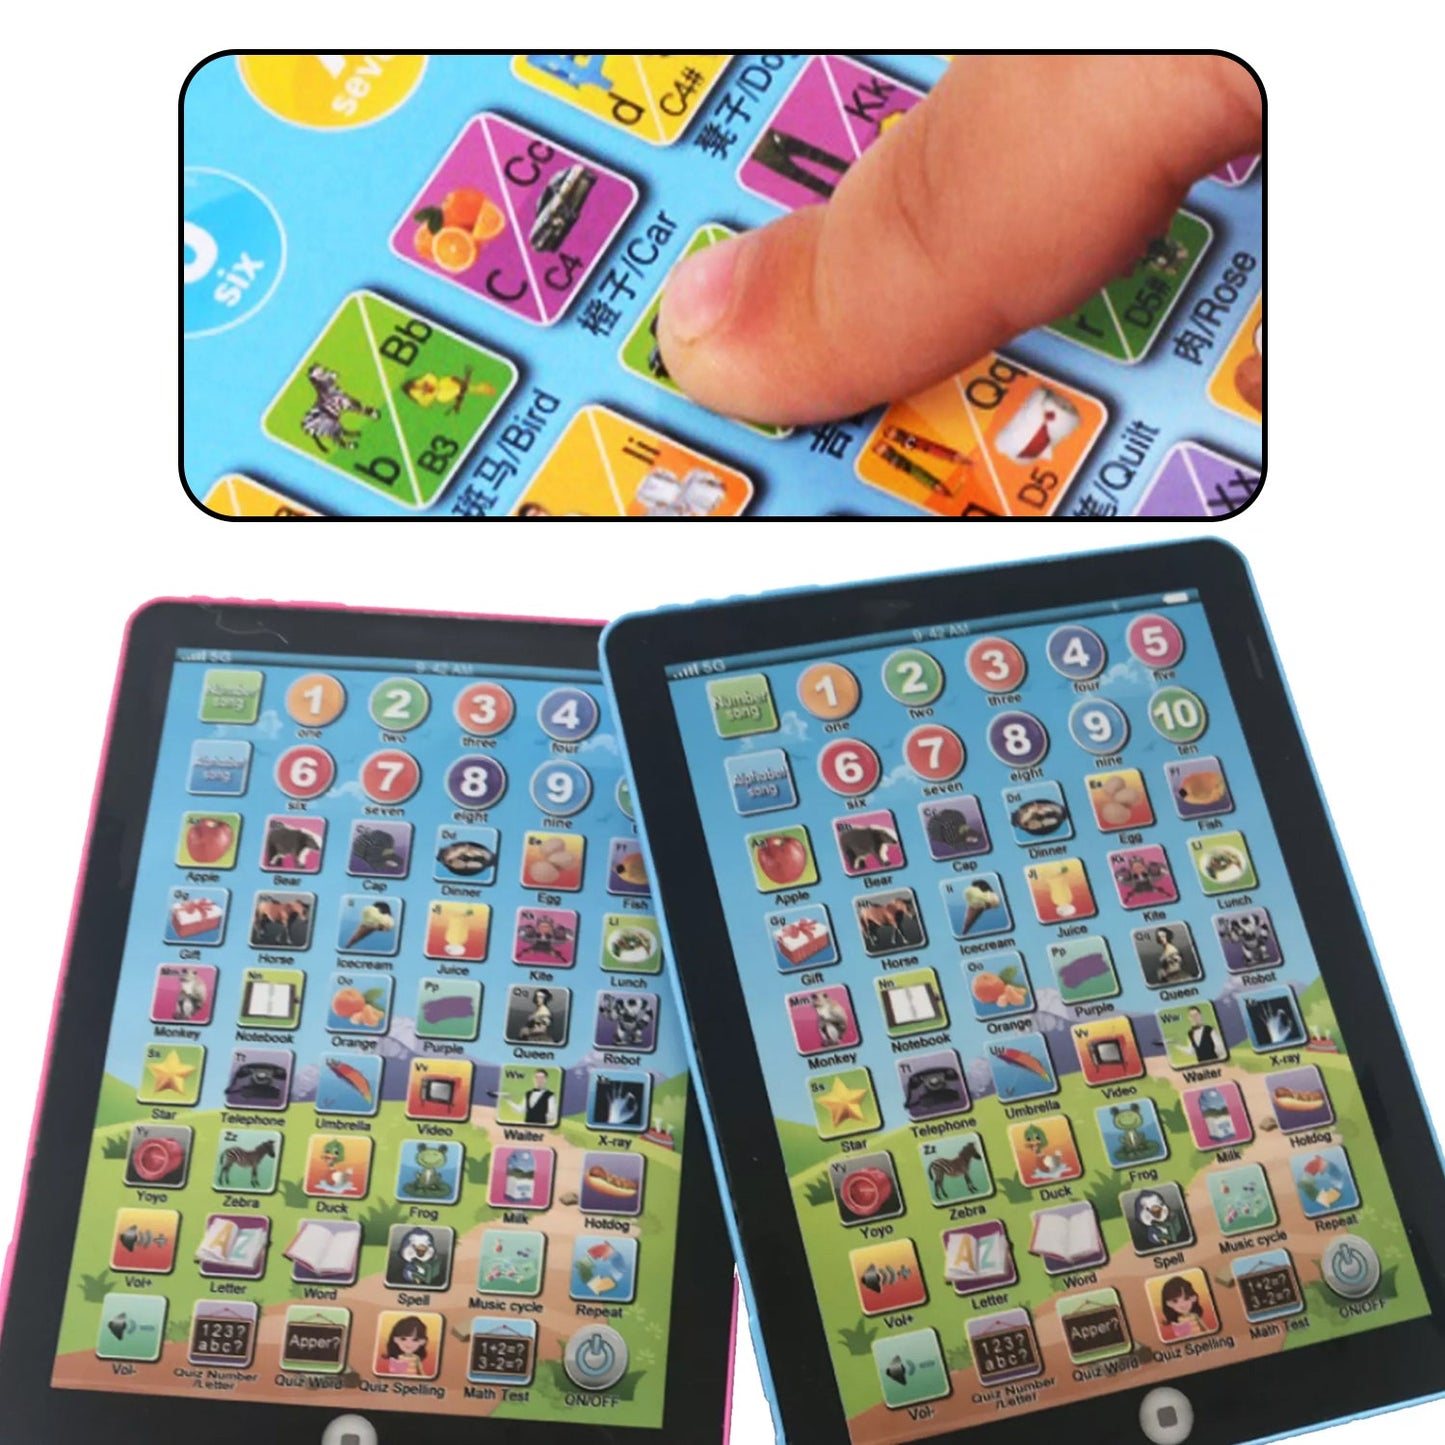 8086 Kids Learning Tablet Pad For Learning Purposes Of Kids And Children’s. 